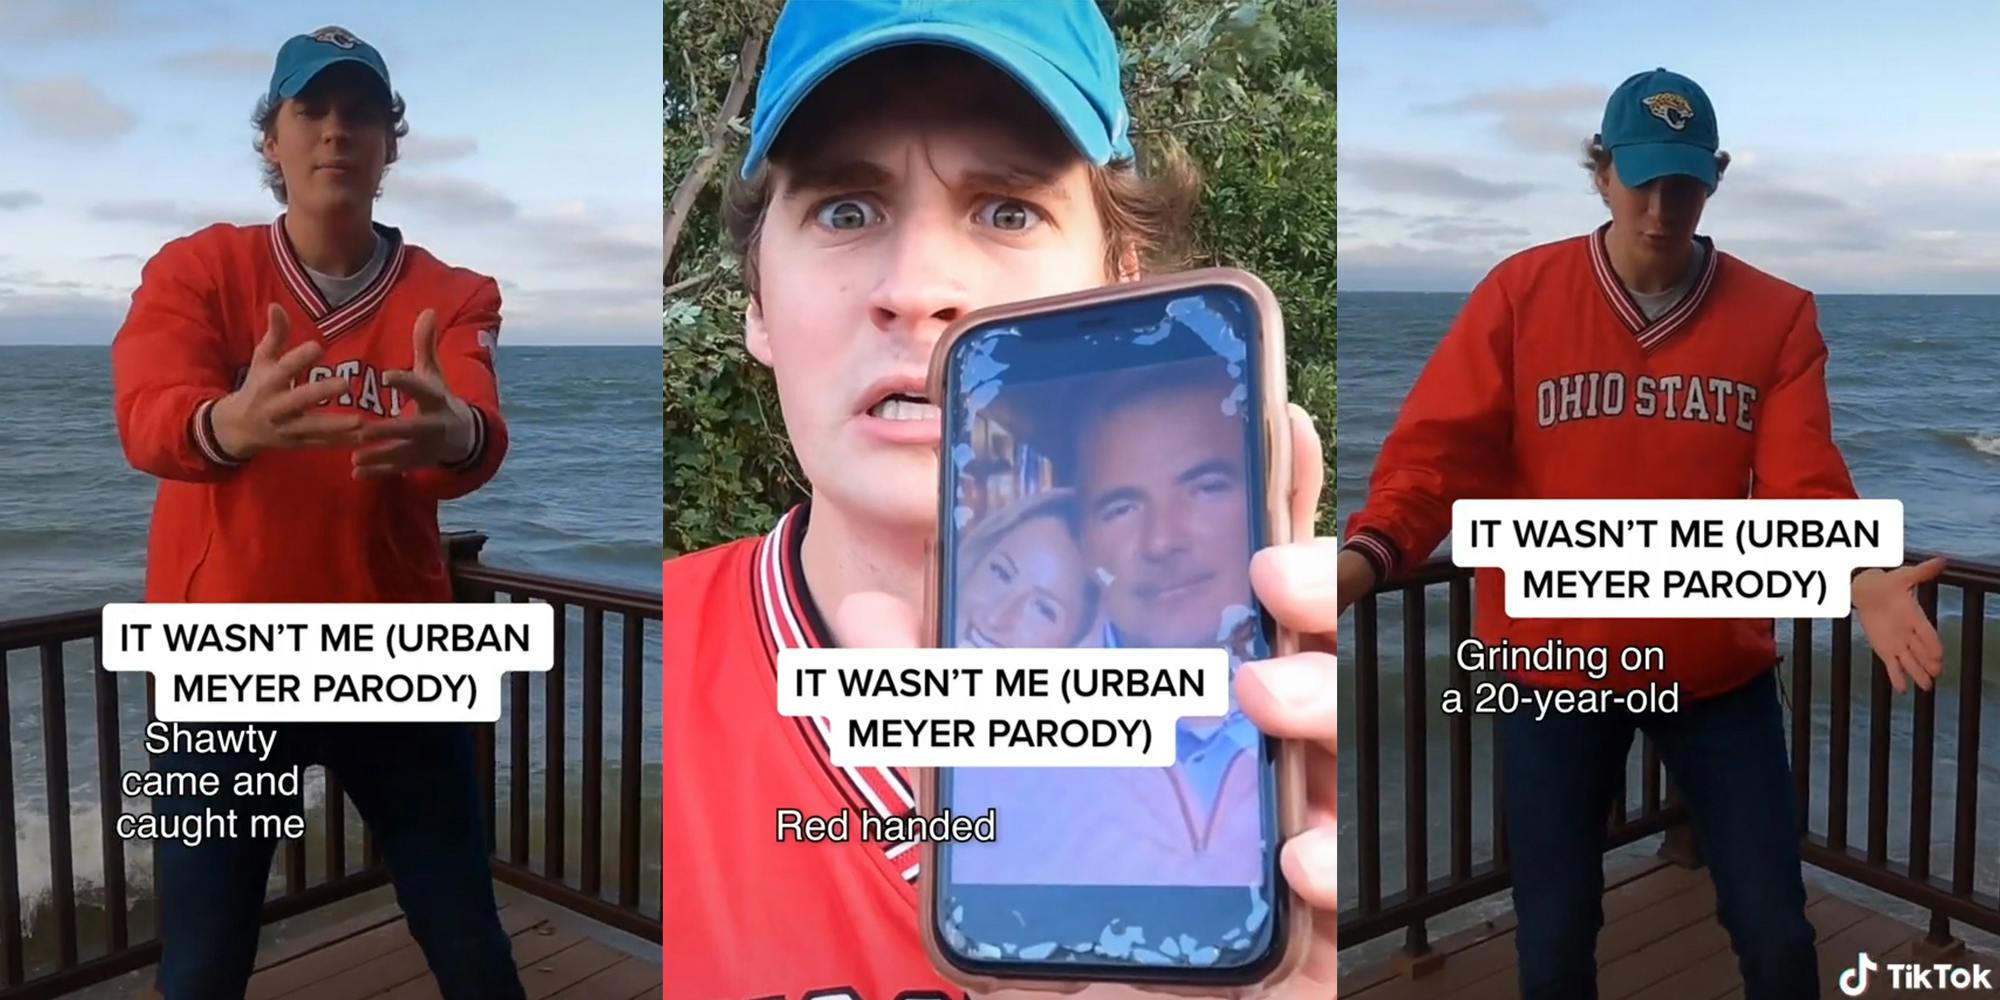 Young man in Ohio State jacket on dock with caption "Shawty came and caught me" (l) same man holding phone with photo of couple and caption "red handed" (c) same man on dock with caption "Grinding on a 20-year-old" (r)